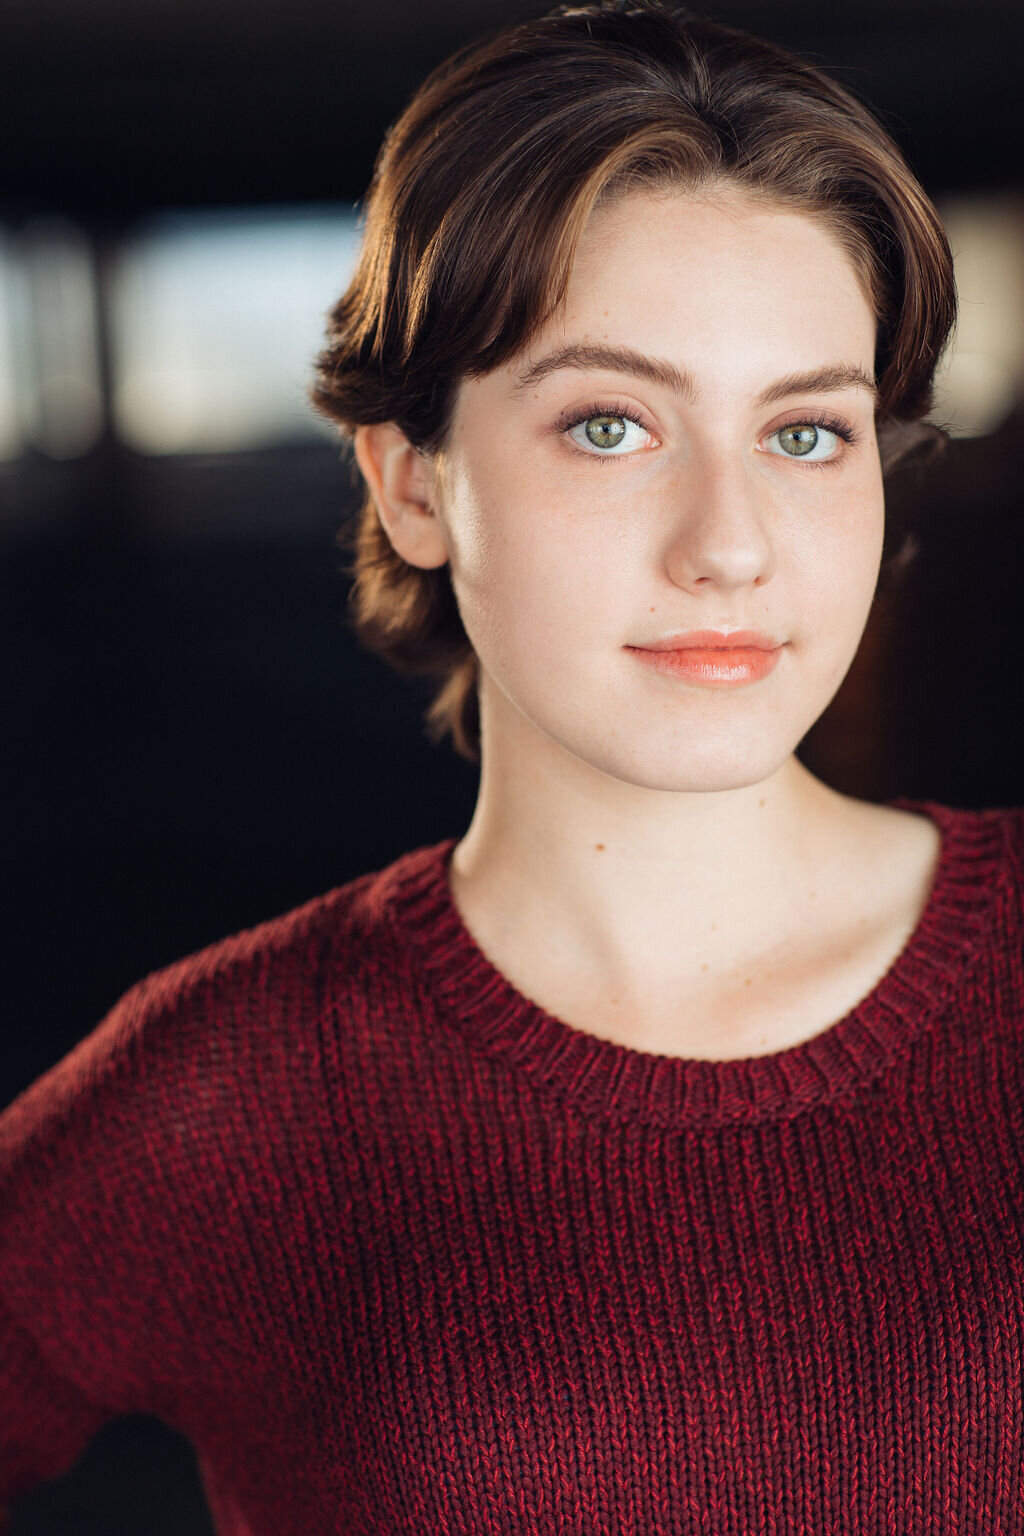 Headshot Photograph Of Young Woman In Maroon Long Sleeves Los Angeles